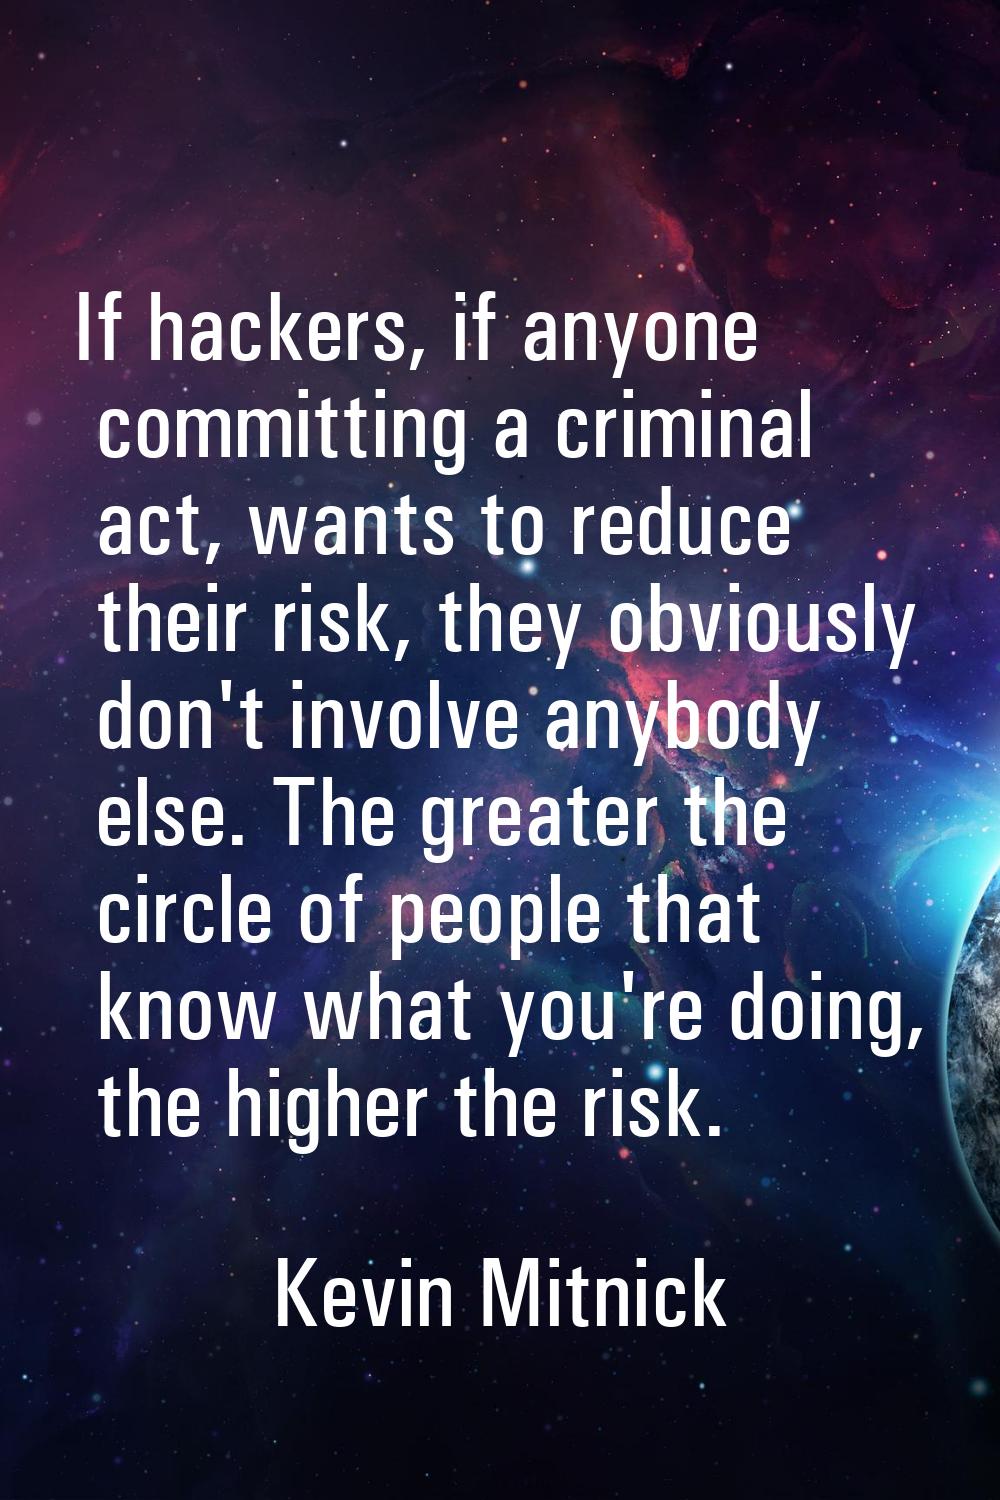 If hackers, if anyone committing a criminal act, wants to reduce their risk, they obviously don't i